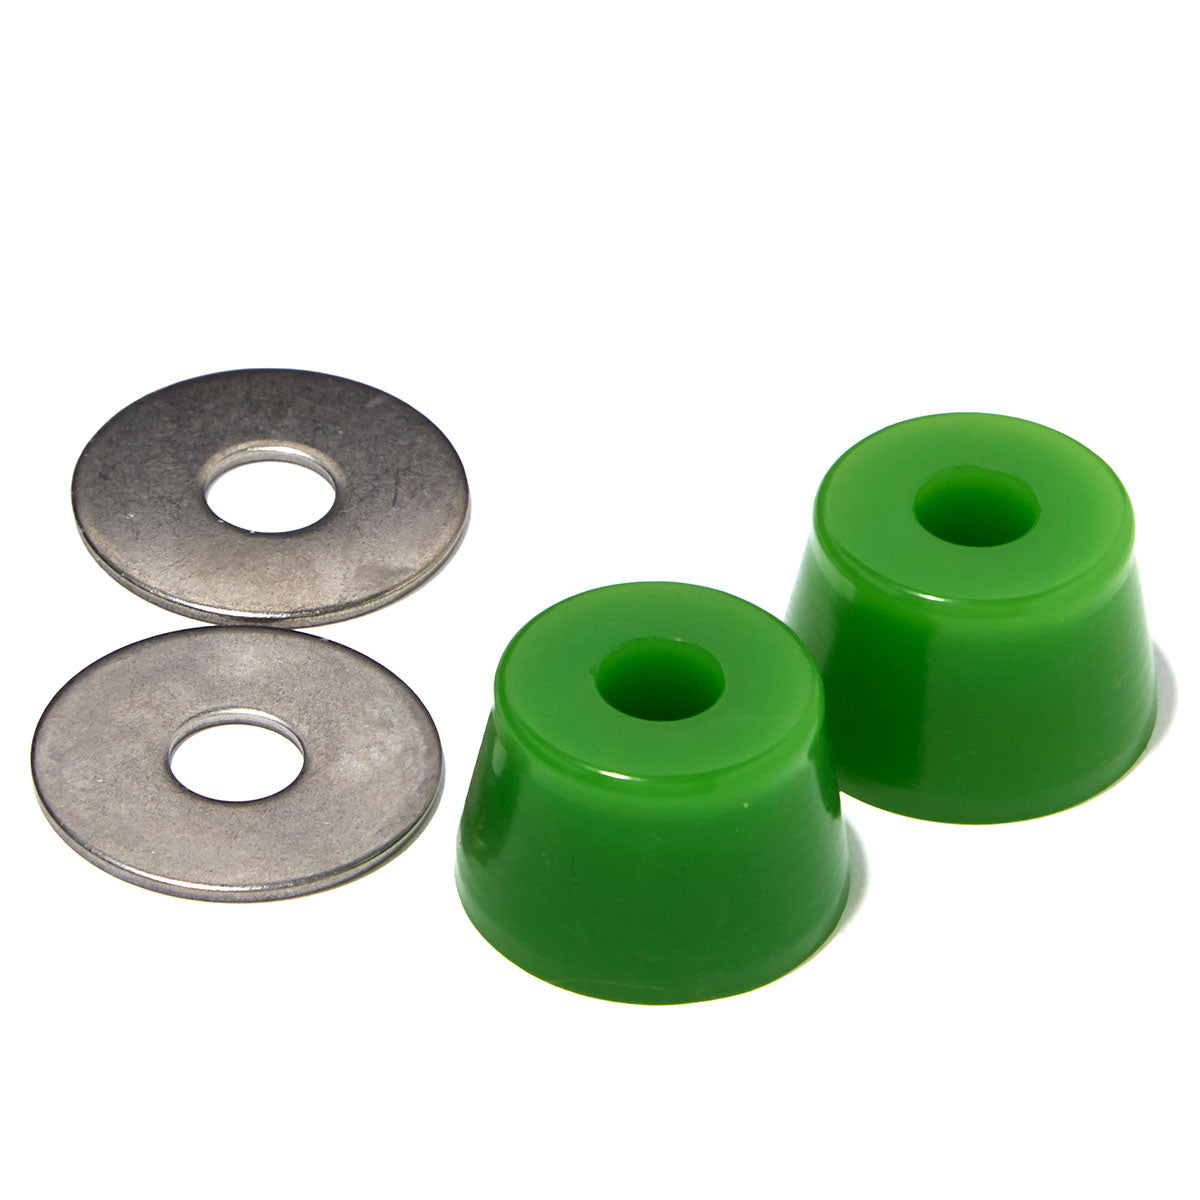 RipTide Tall Fat Cone Bushings - APS 75a image 1